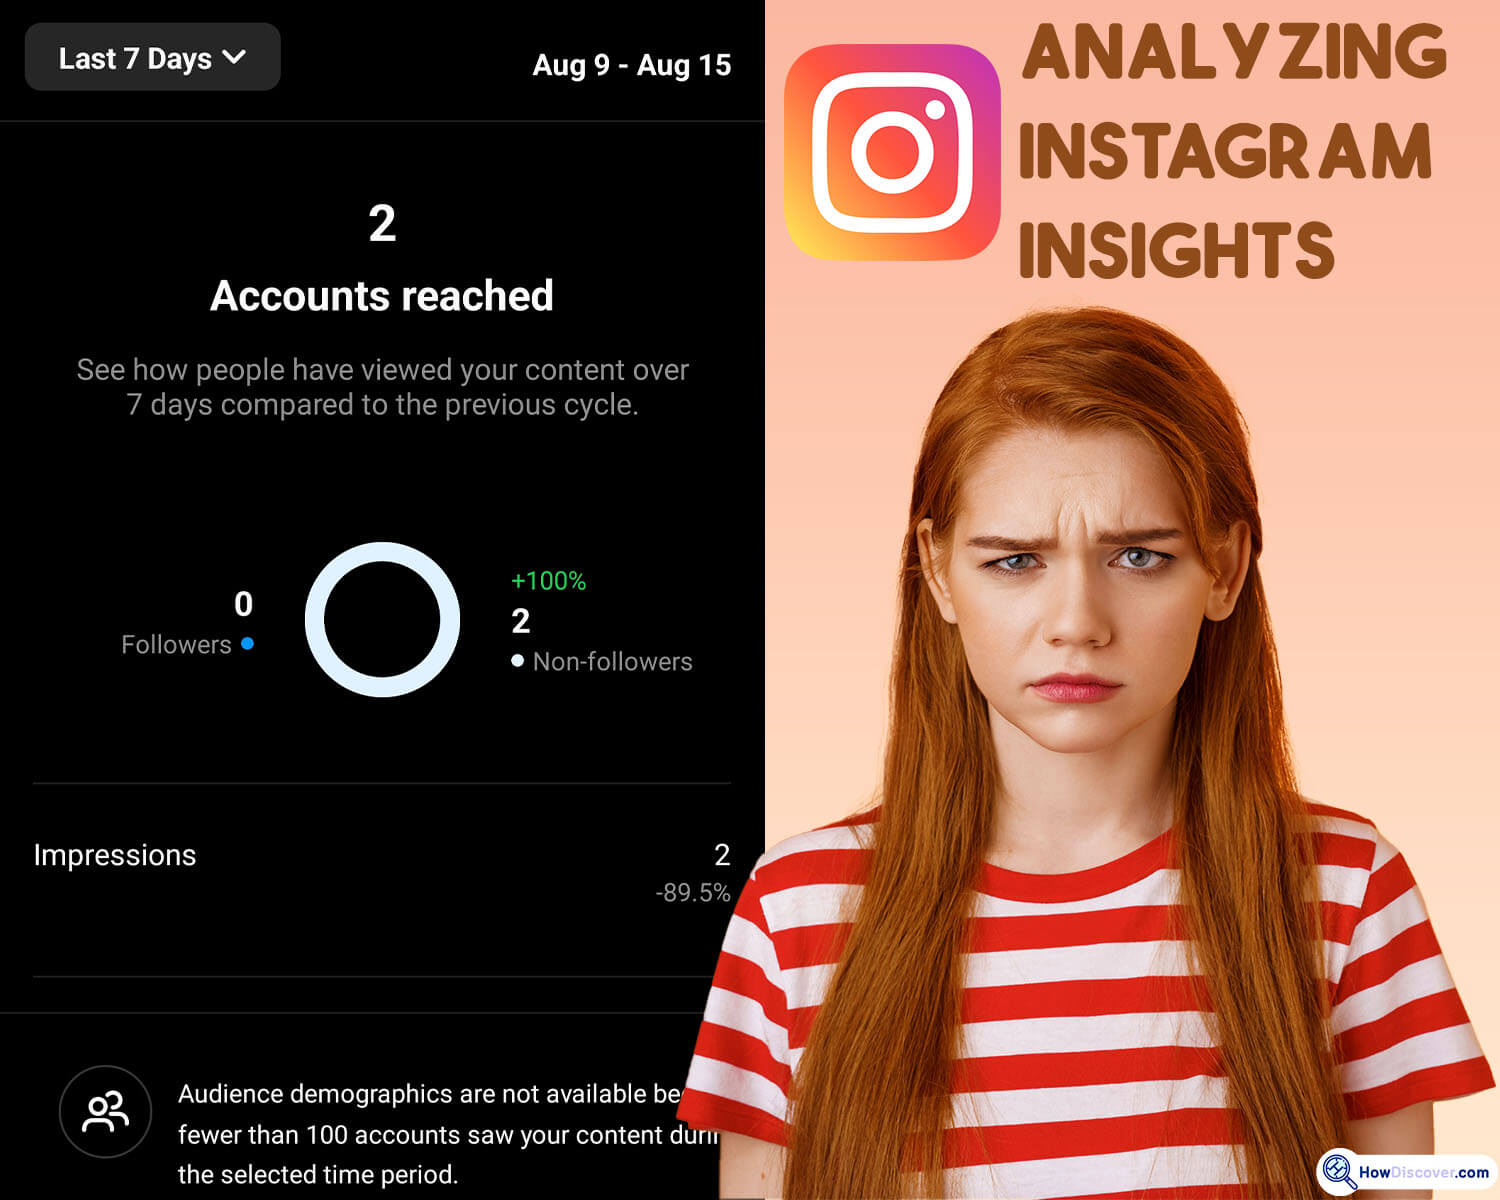 how to see who doesn't follow you back on Instagram website - Analyzing Instagram Insights to identify non-followers